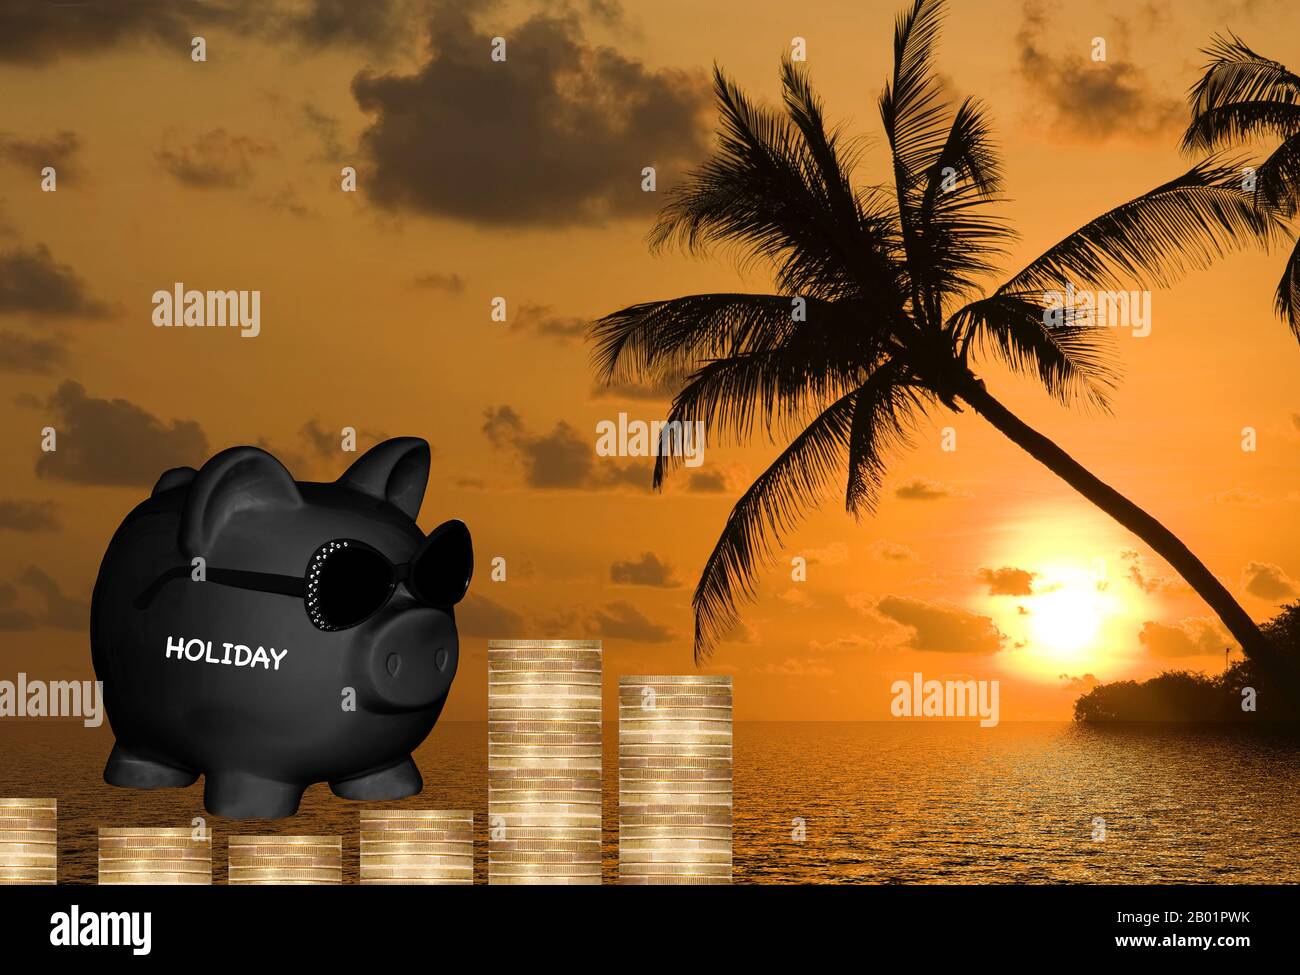 black piggy bank with sunglasses and lettering Holiday, palm beach at sunset in background, composing Stock Photo